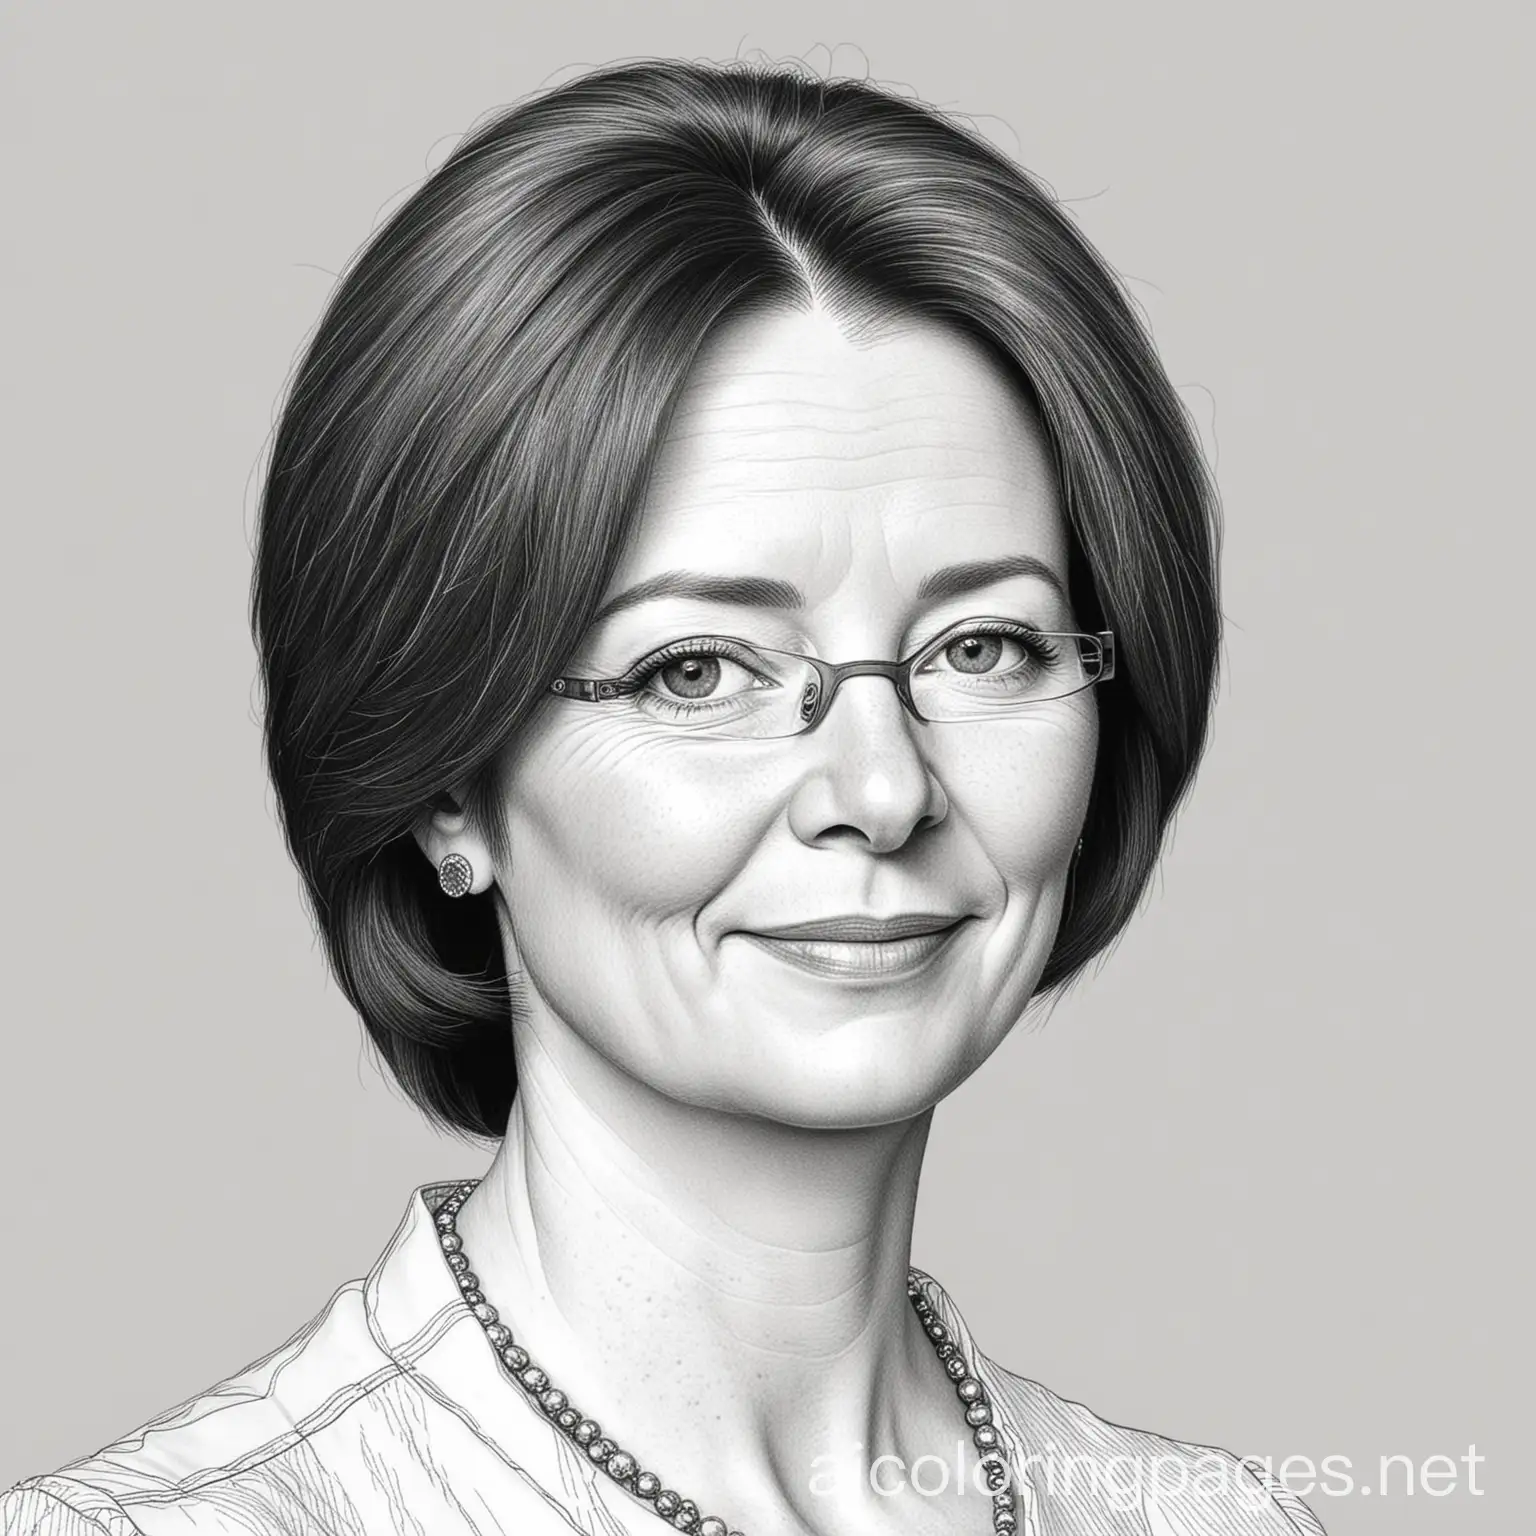 A portrait of Julia Gillard, Coloring Page, black and white, line art, white background, Simplicity, Ample White Space. The background of the coloring page is plain white to make it easy for young children to color within the lines. The outlines of all the subjects are easy to distinguish, making it simple for kids to color without too much difficulty